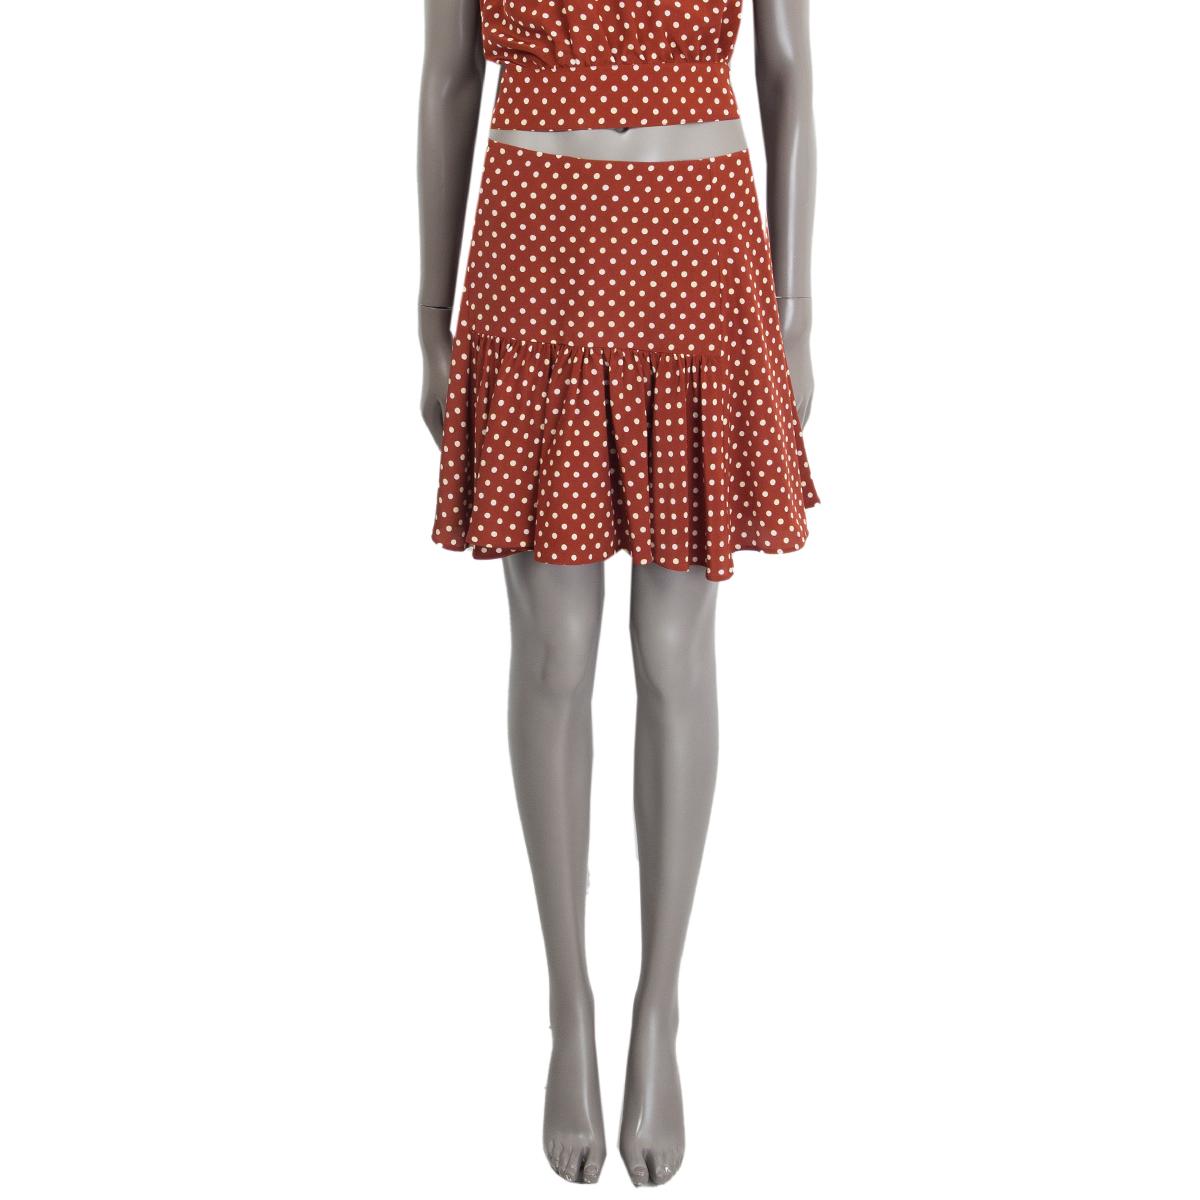 100% authentic Prada flared polka dot mini skirt in cognac and off-white silk (100%). Opens with a zipper on the side. Has been worn and is in excellent condition. Comes with matching top in separate listing. 

Measurements
Tag Size	42
Size	M
Waist